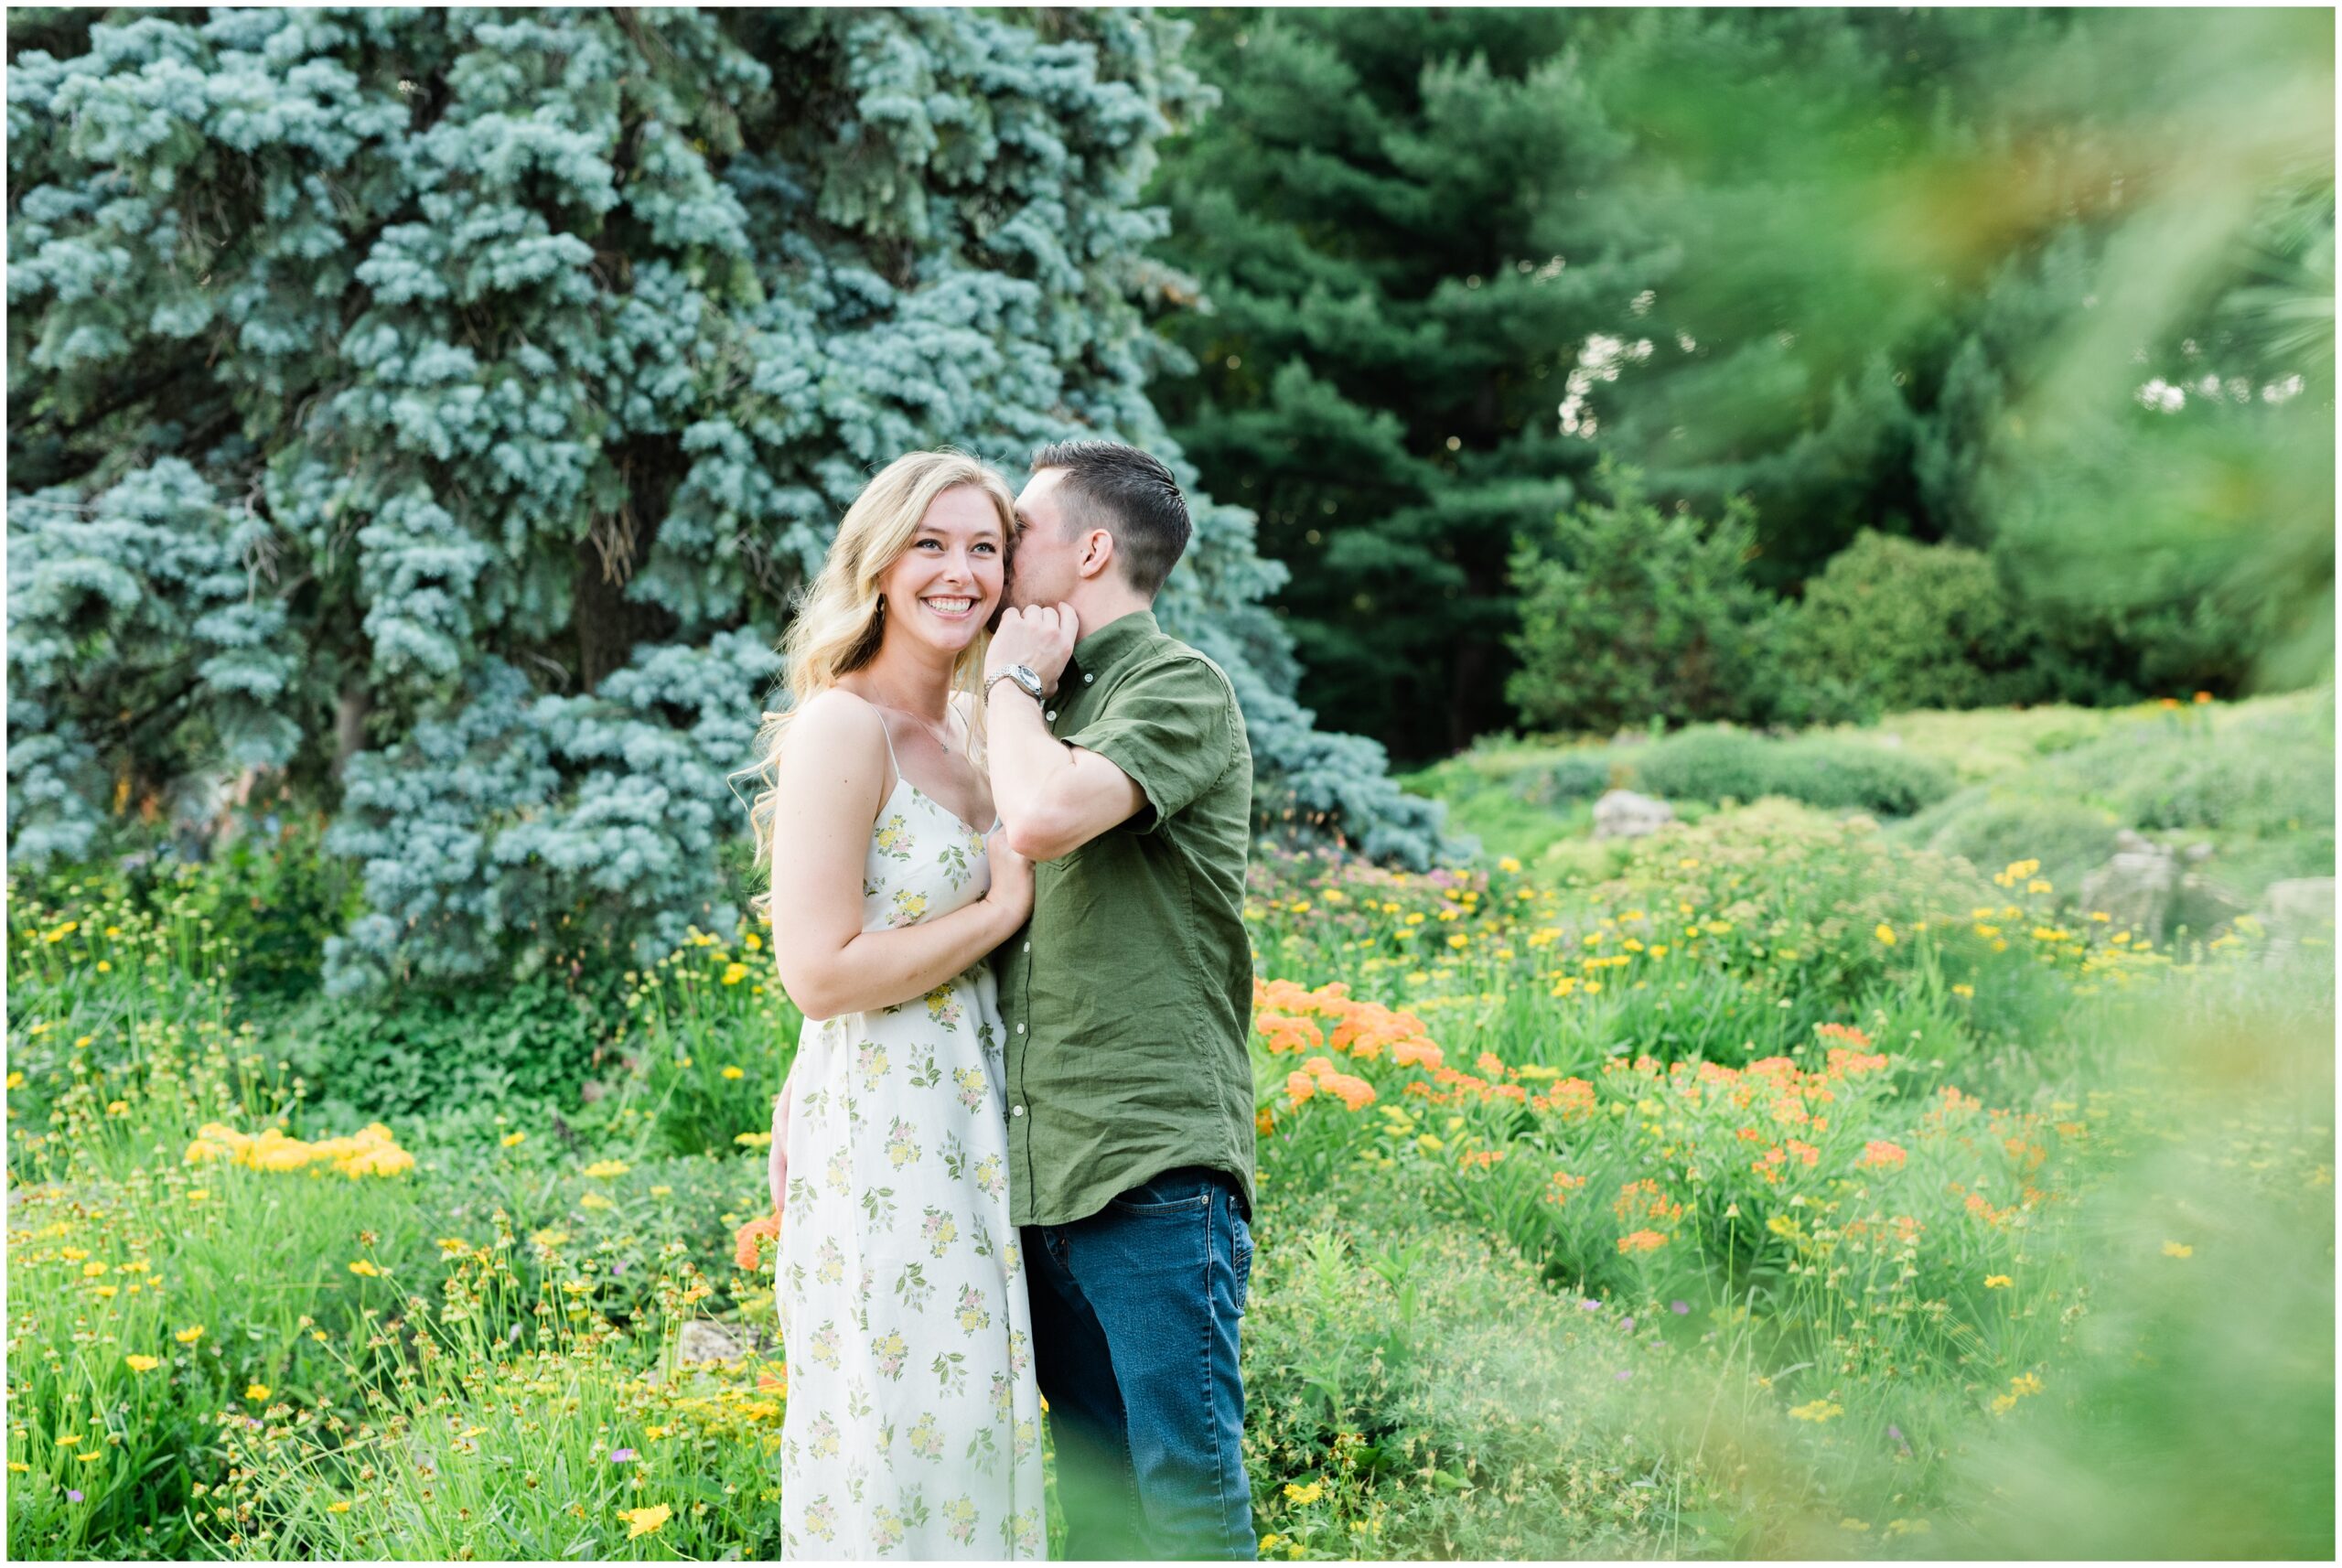 Couple smiling and whispering in a garden.